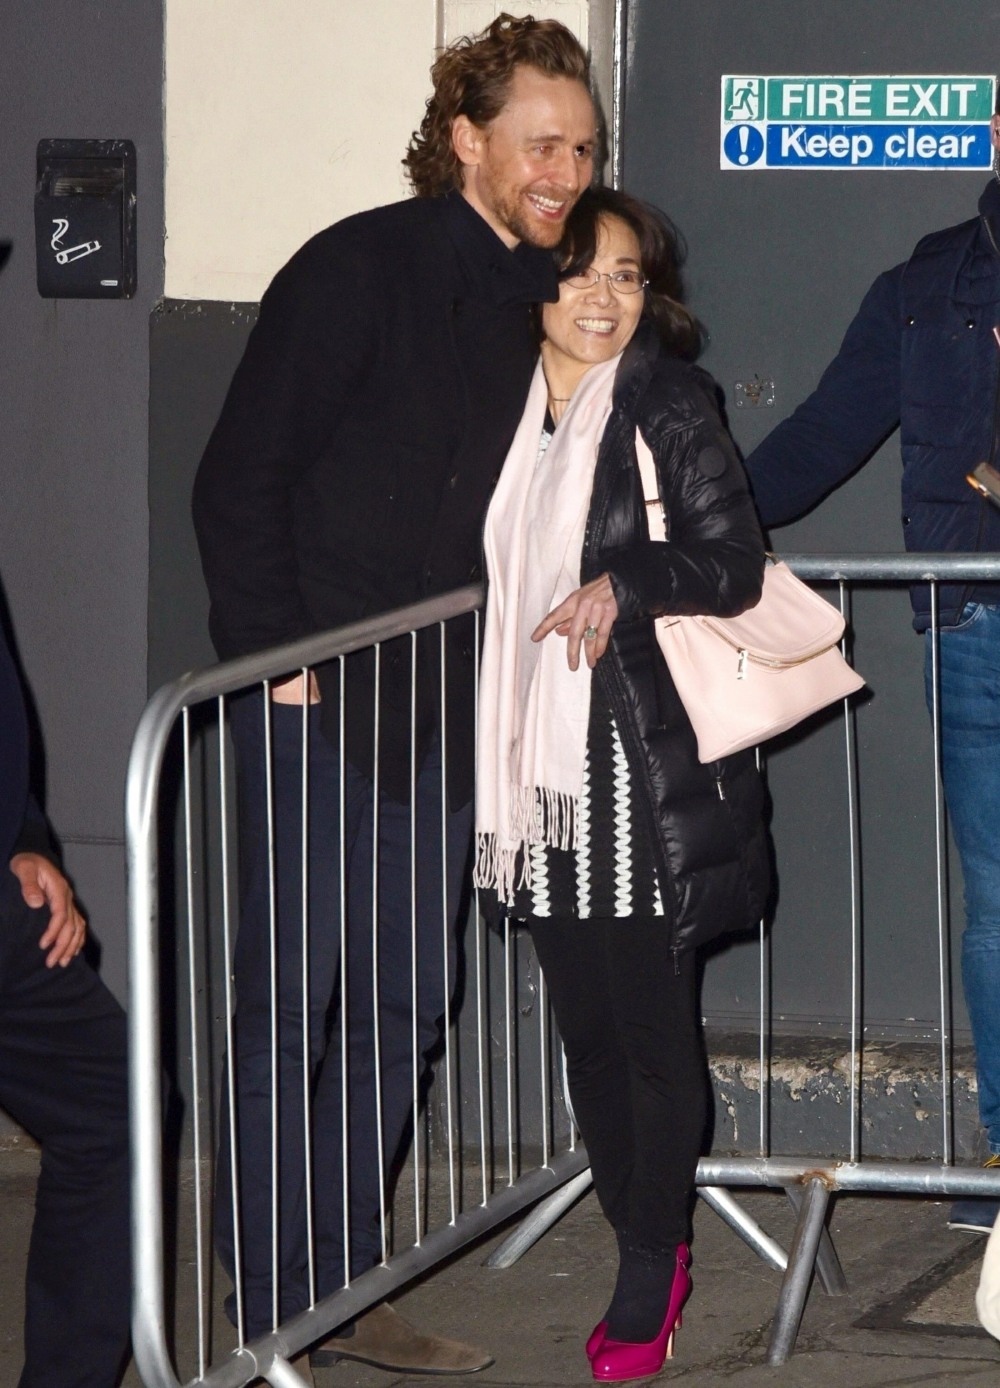 Tom Hiddleston and Zawe Ashton greeted by adoring fans as they left the Harold Pinter Theatre